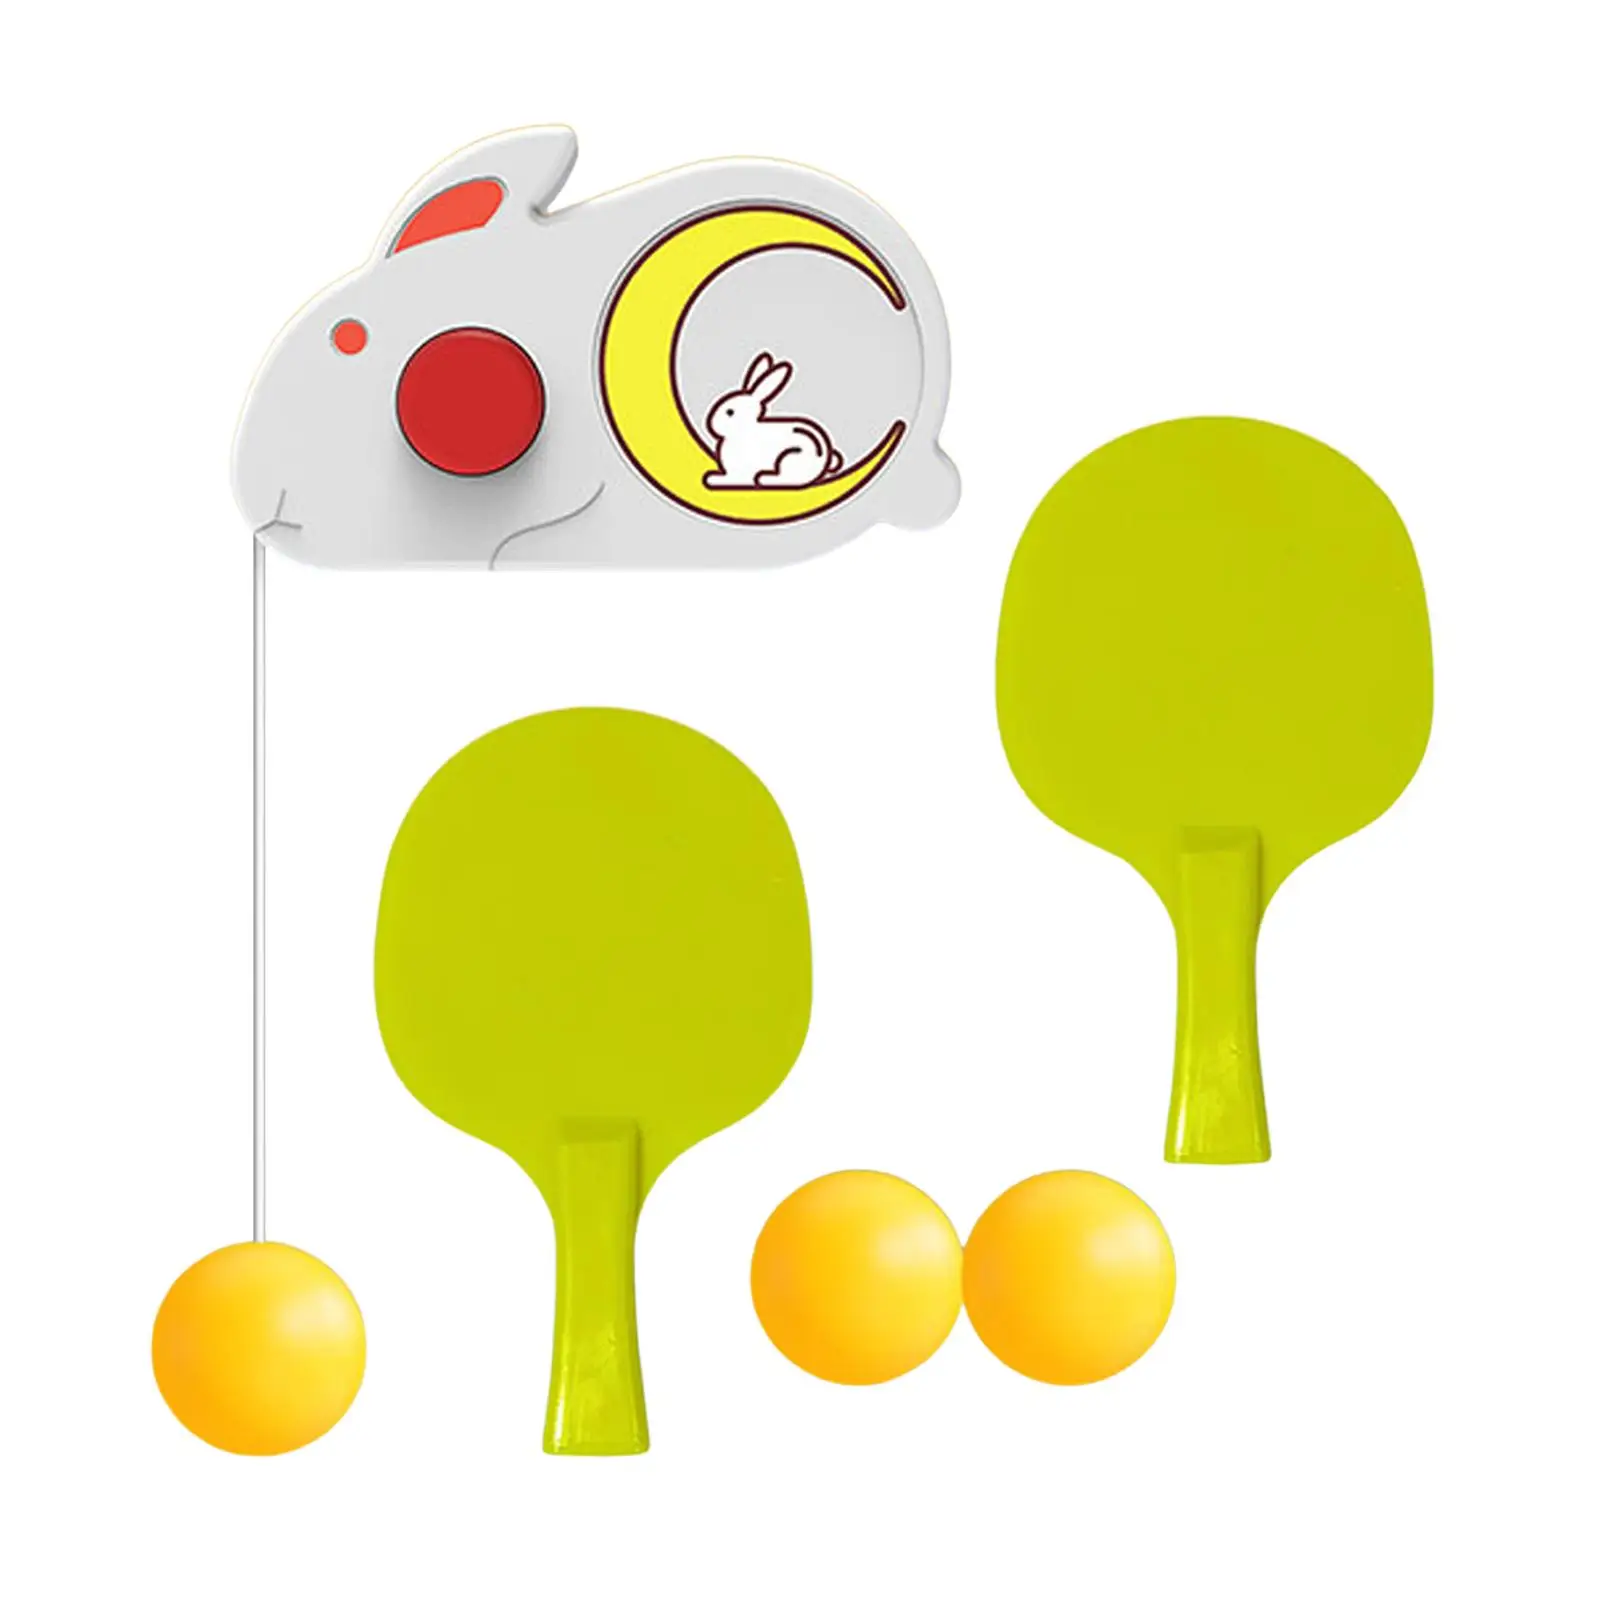 Hanging Table Tennis Trainer Adjustable Table Tennis Paddles and Ball Set with Racquet and Balls for Girls Beginners Kids Adults